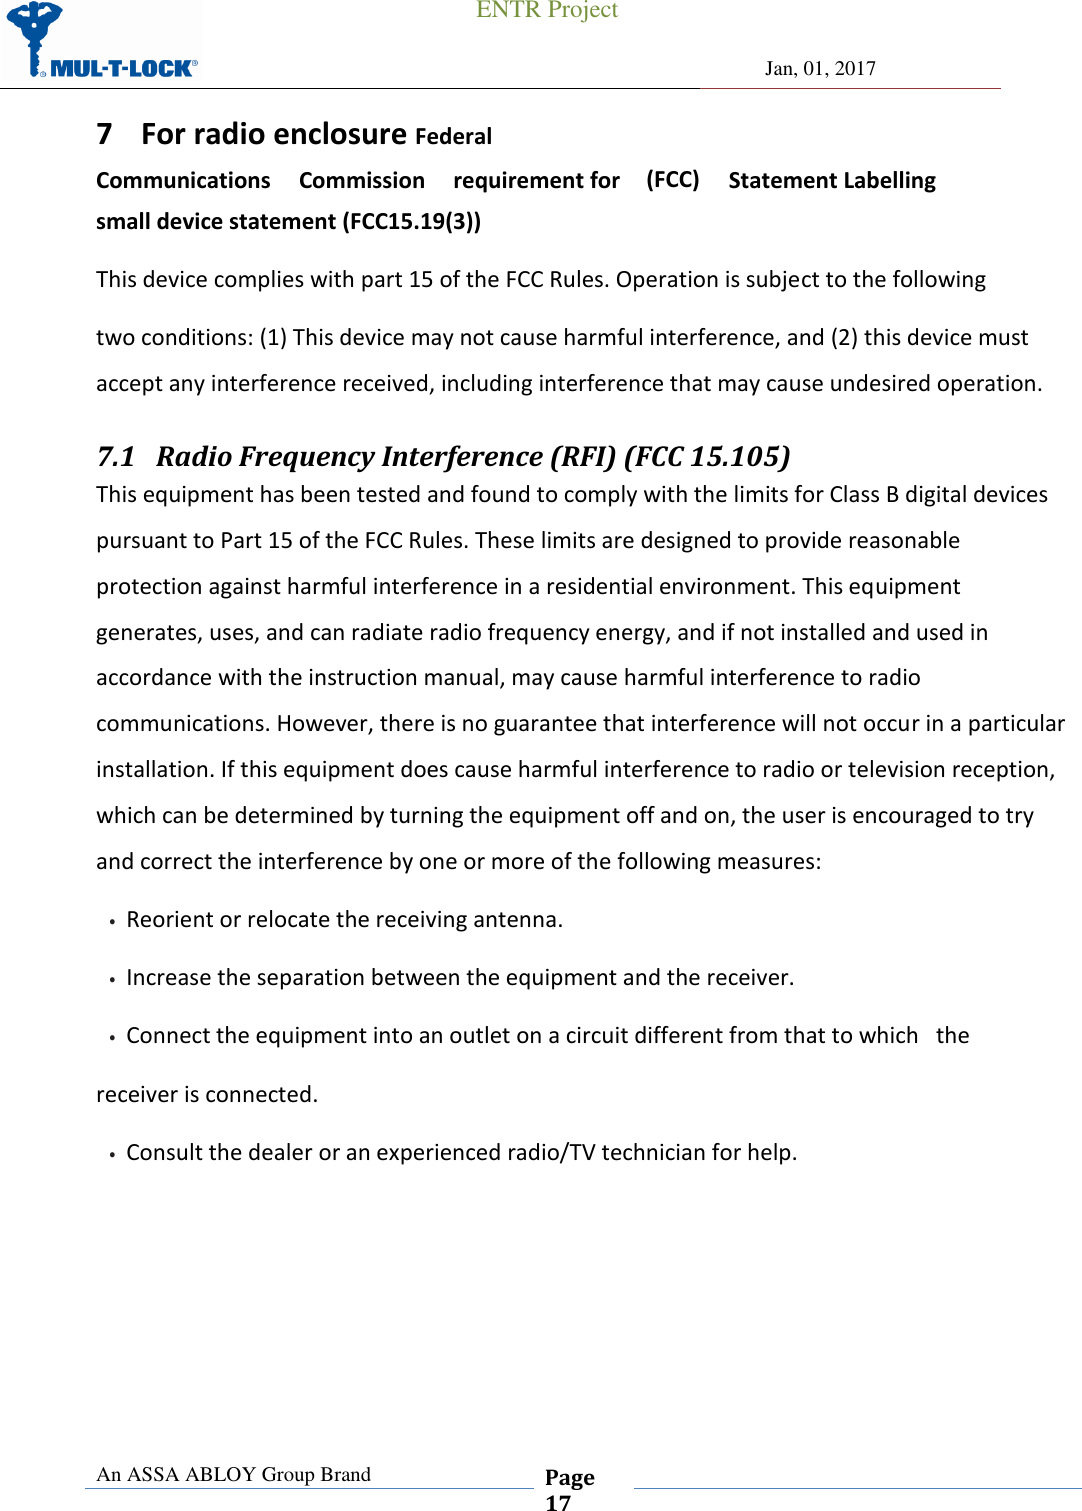 ENTR Project     Jan, 01, 2017 An ASSA ABLOY Group Brand  Page 17  (FCC)   Statement Labelling 7 For radio enclosure Federal           Communications     Commission     requirement for small device statement (FCC15.19(3)) This device complies with part 15 of the FCC Rules. Operation is subject to the following two conditions: (1) This device may not cause harmful interference, and (2) this device must accept any interference received, including interference that may cause undesired operation. 7.1 Radio Frequency Interference (RFI) (FCC 15.105) This equipment has been tested and found to comply with the limits for Class B digital devices pursuant to Part 15 of the FCC Rules. These limits are designed to provide reasonable protection against harmful interference in a residential environment. This equipment generates, uses, and can radiate radio frequency energy, and if not installed and used in accordance with the instruction manual, may cause harmful interference to radio communications. However, there is no guarantee that interference will not occur in a particular installation. If this equipment does cause harmful interference to radio or television reception, which can be determined by turning the equipment off and on, the user is encouraged to try and correct the interference by one or more of the following measures: •Reorient or relocate the receiving antenna.•Increase the separation between the equipment and the receiver.•Connect the equipment into an outlet on a circuit different from that to which   thereceiver is connected. •Consult the dealer or an experienced radio/TV technician for help.